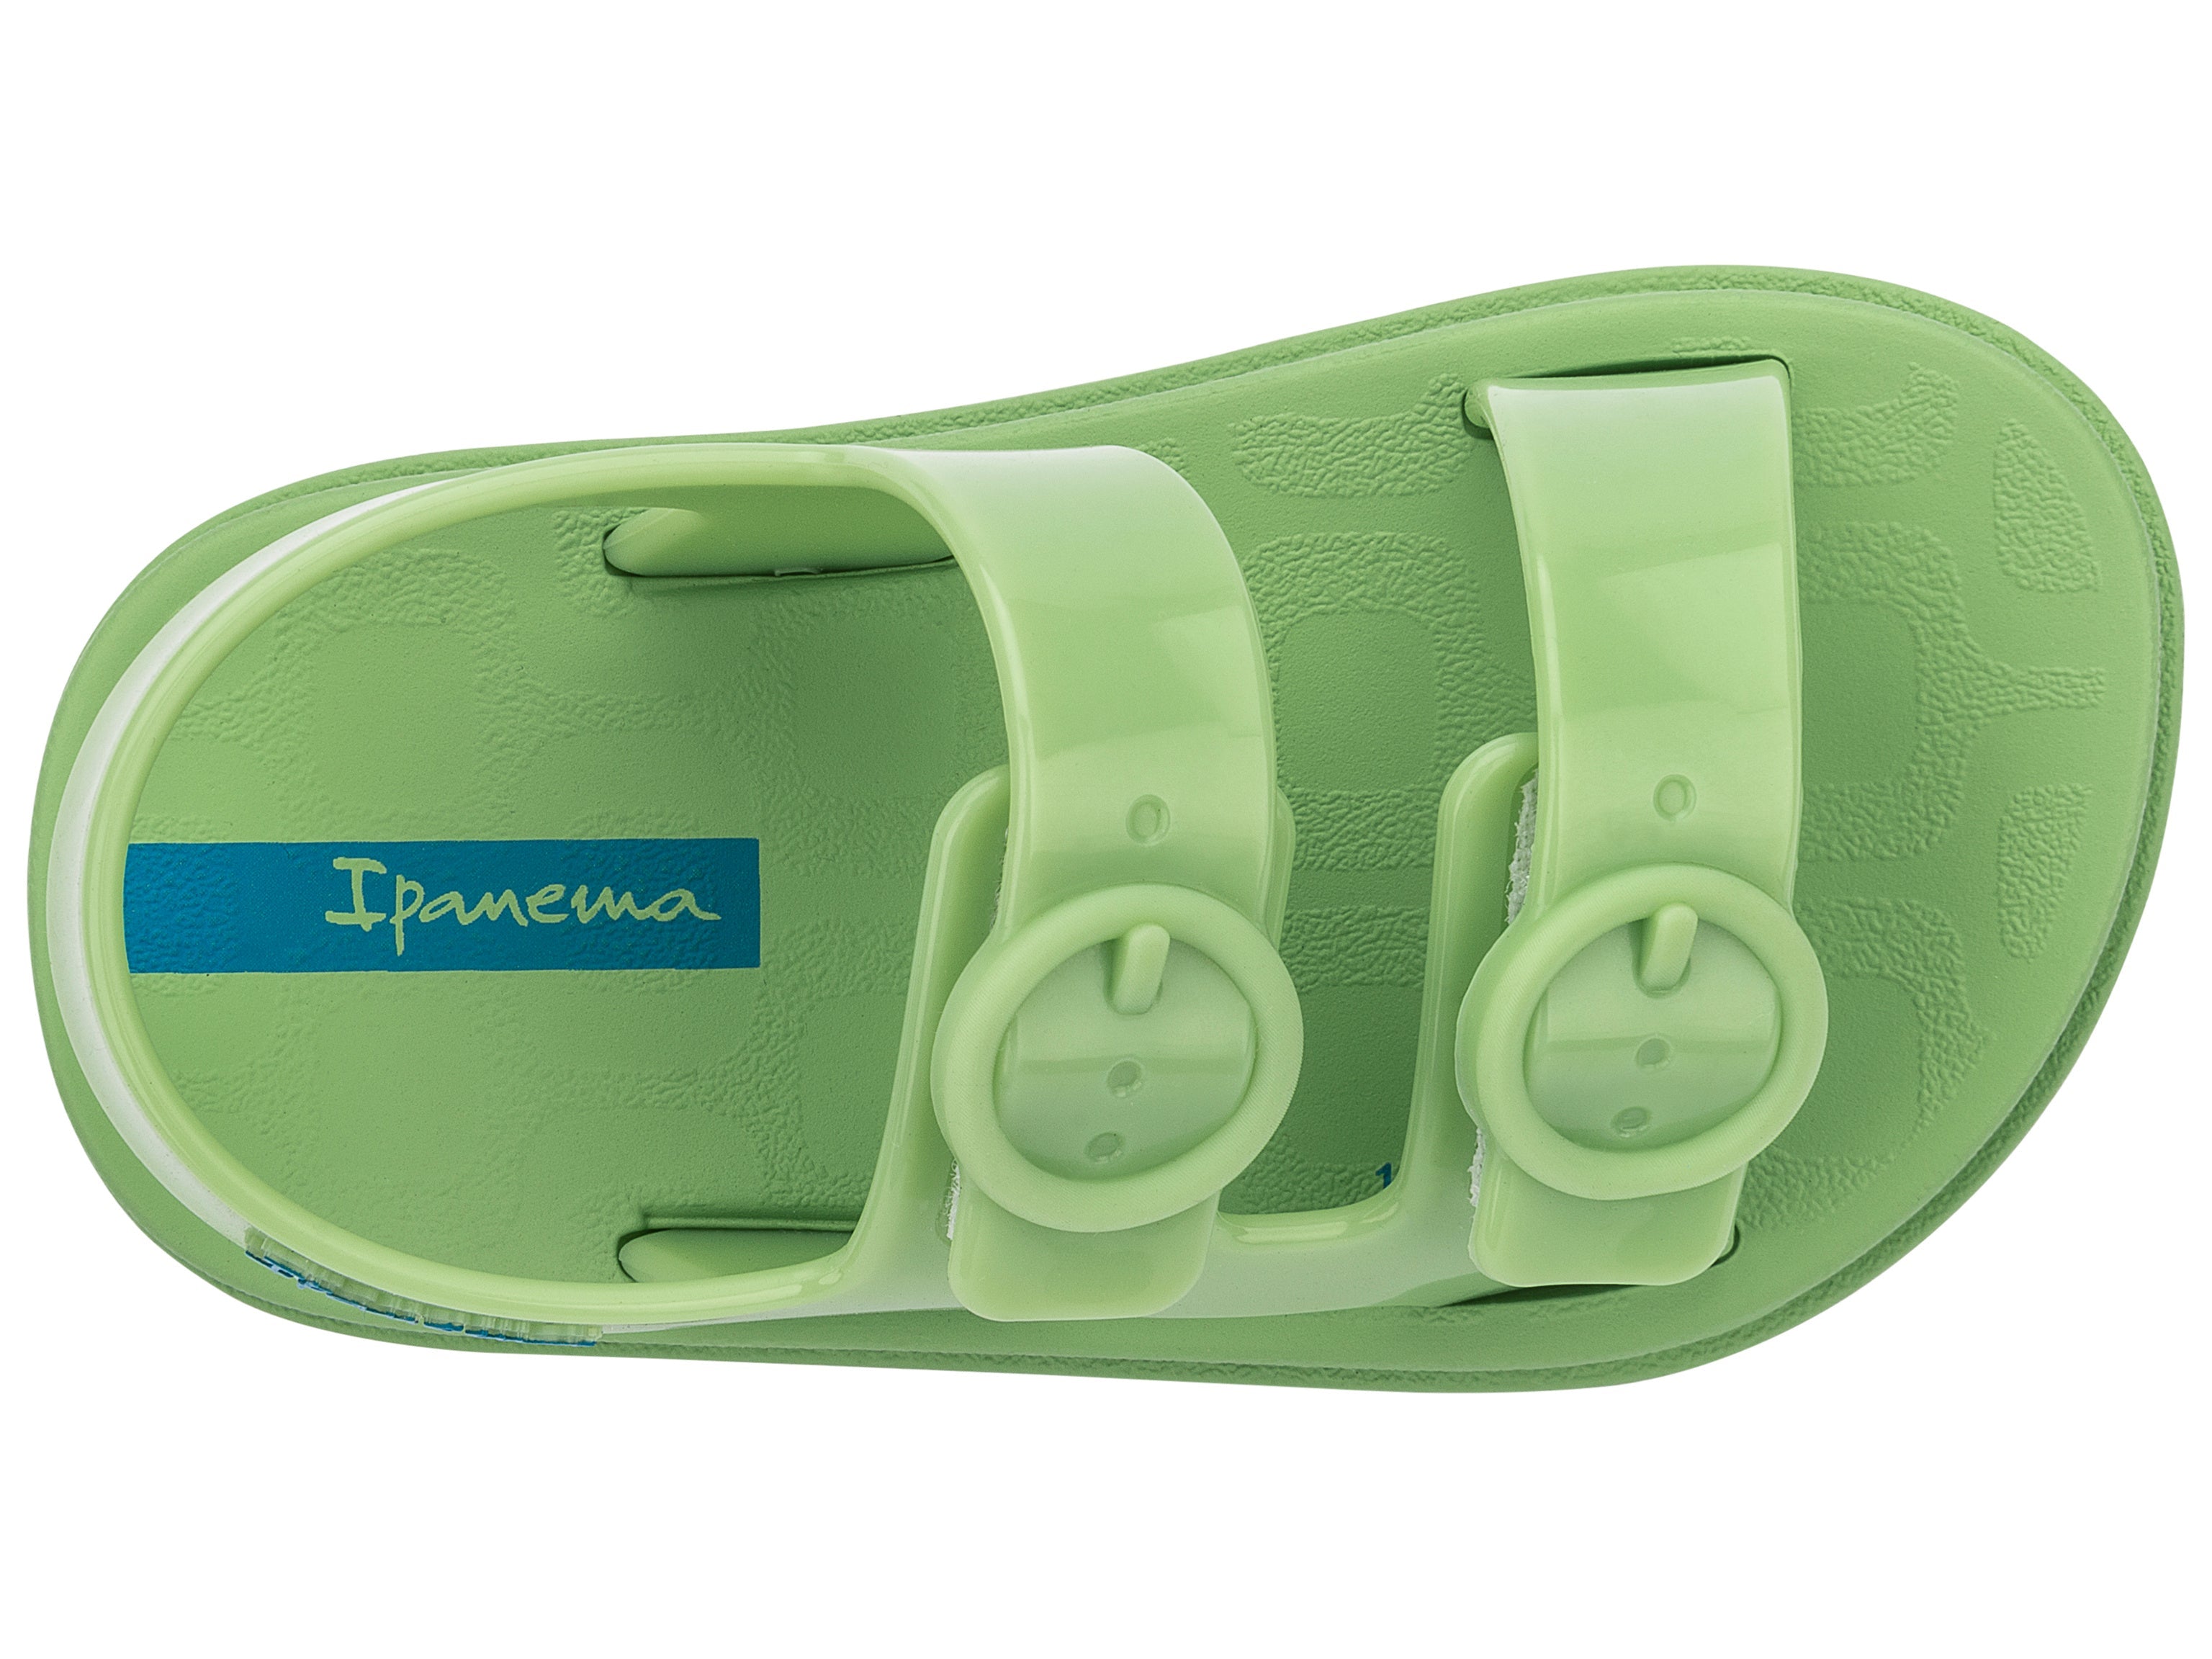 Top view of a green Ipanema Follow baby sandal with two decorative buckles on the upper.